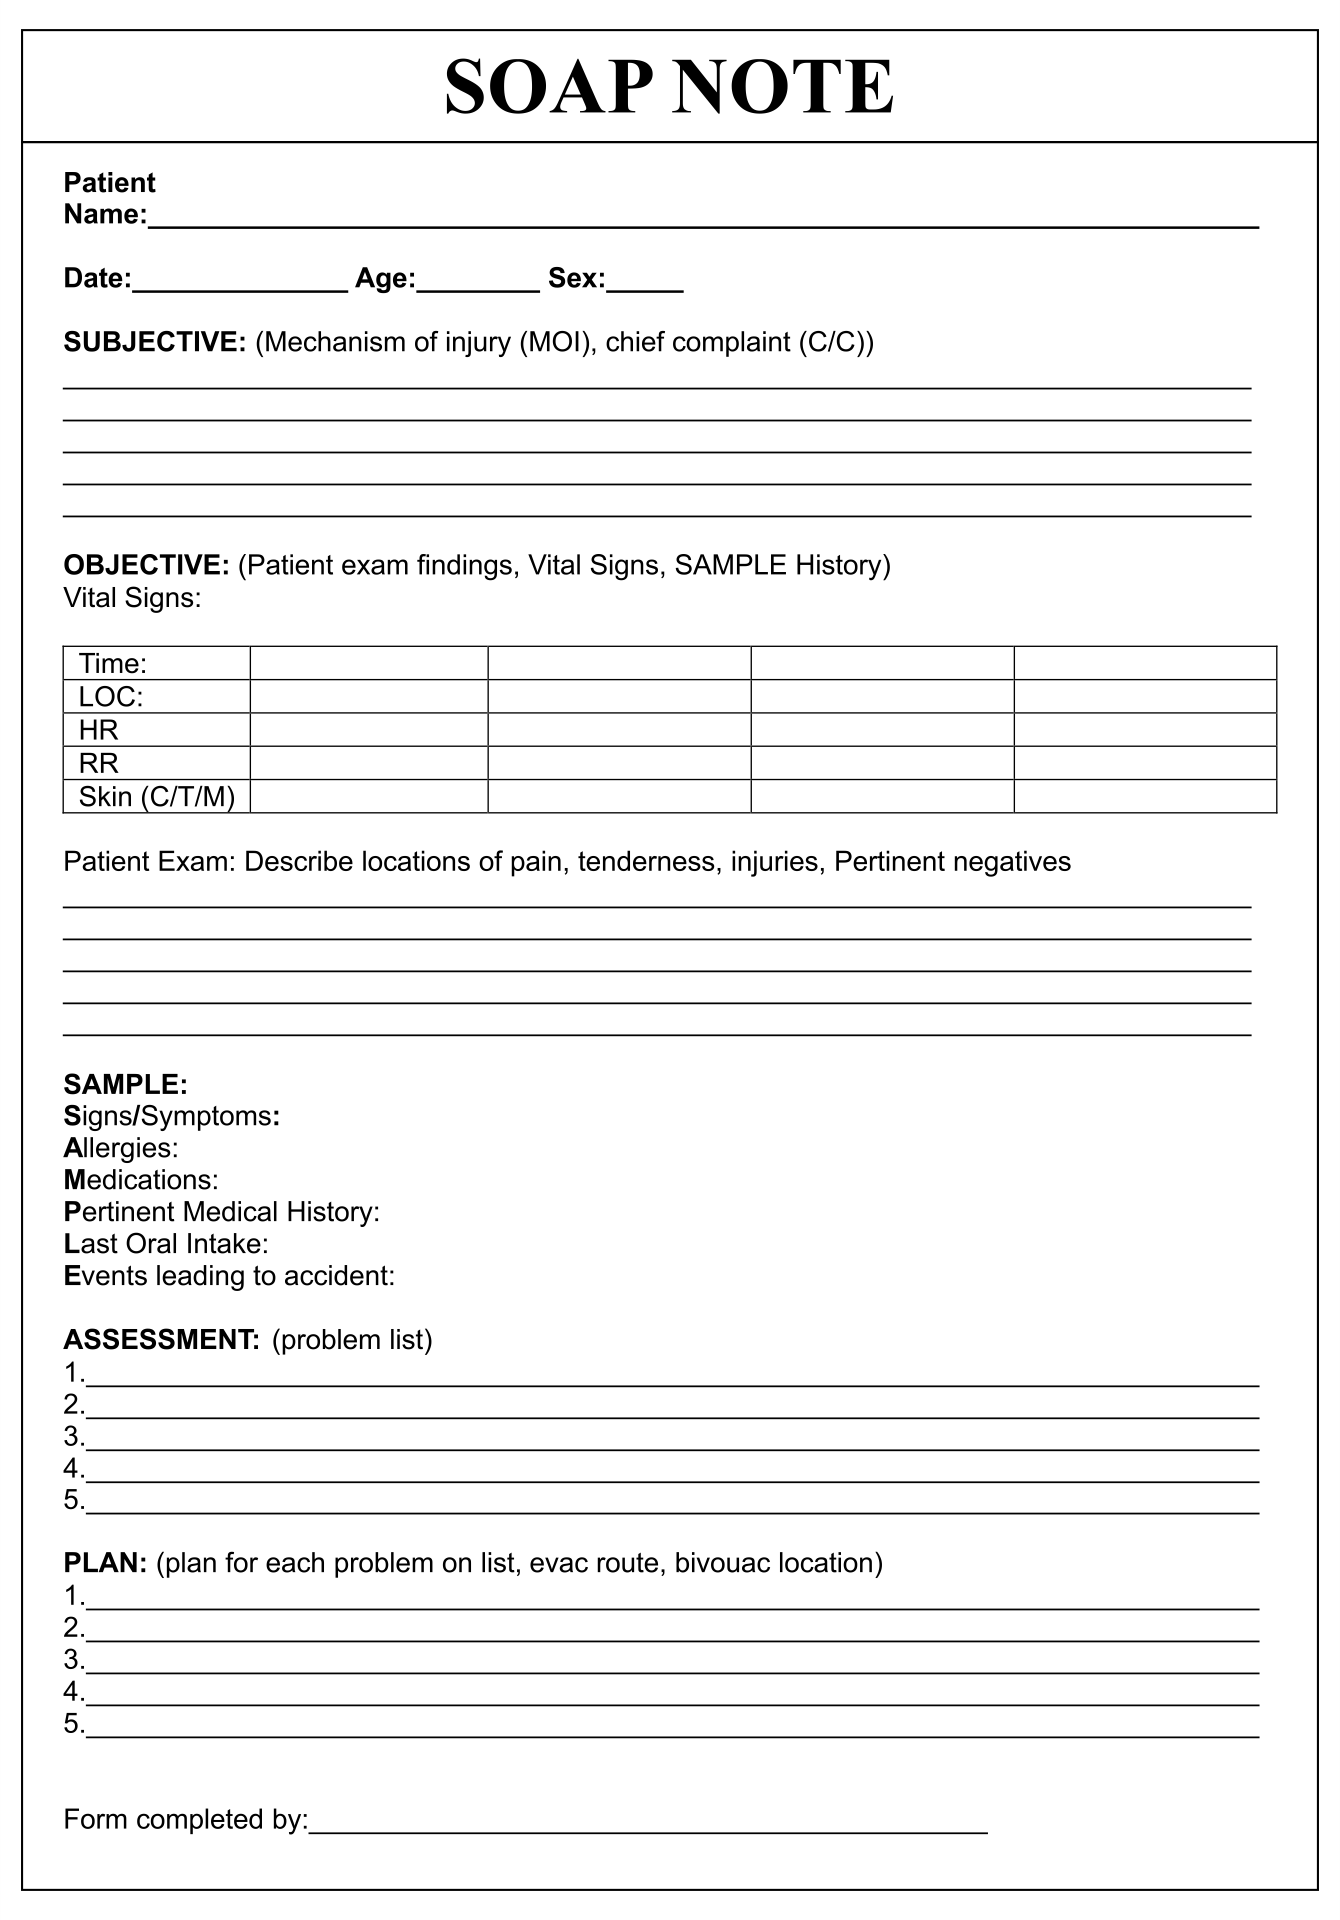 printable-dental-soap-note-template